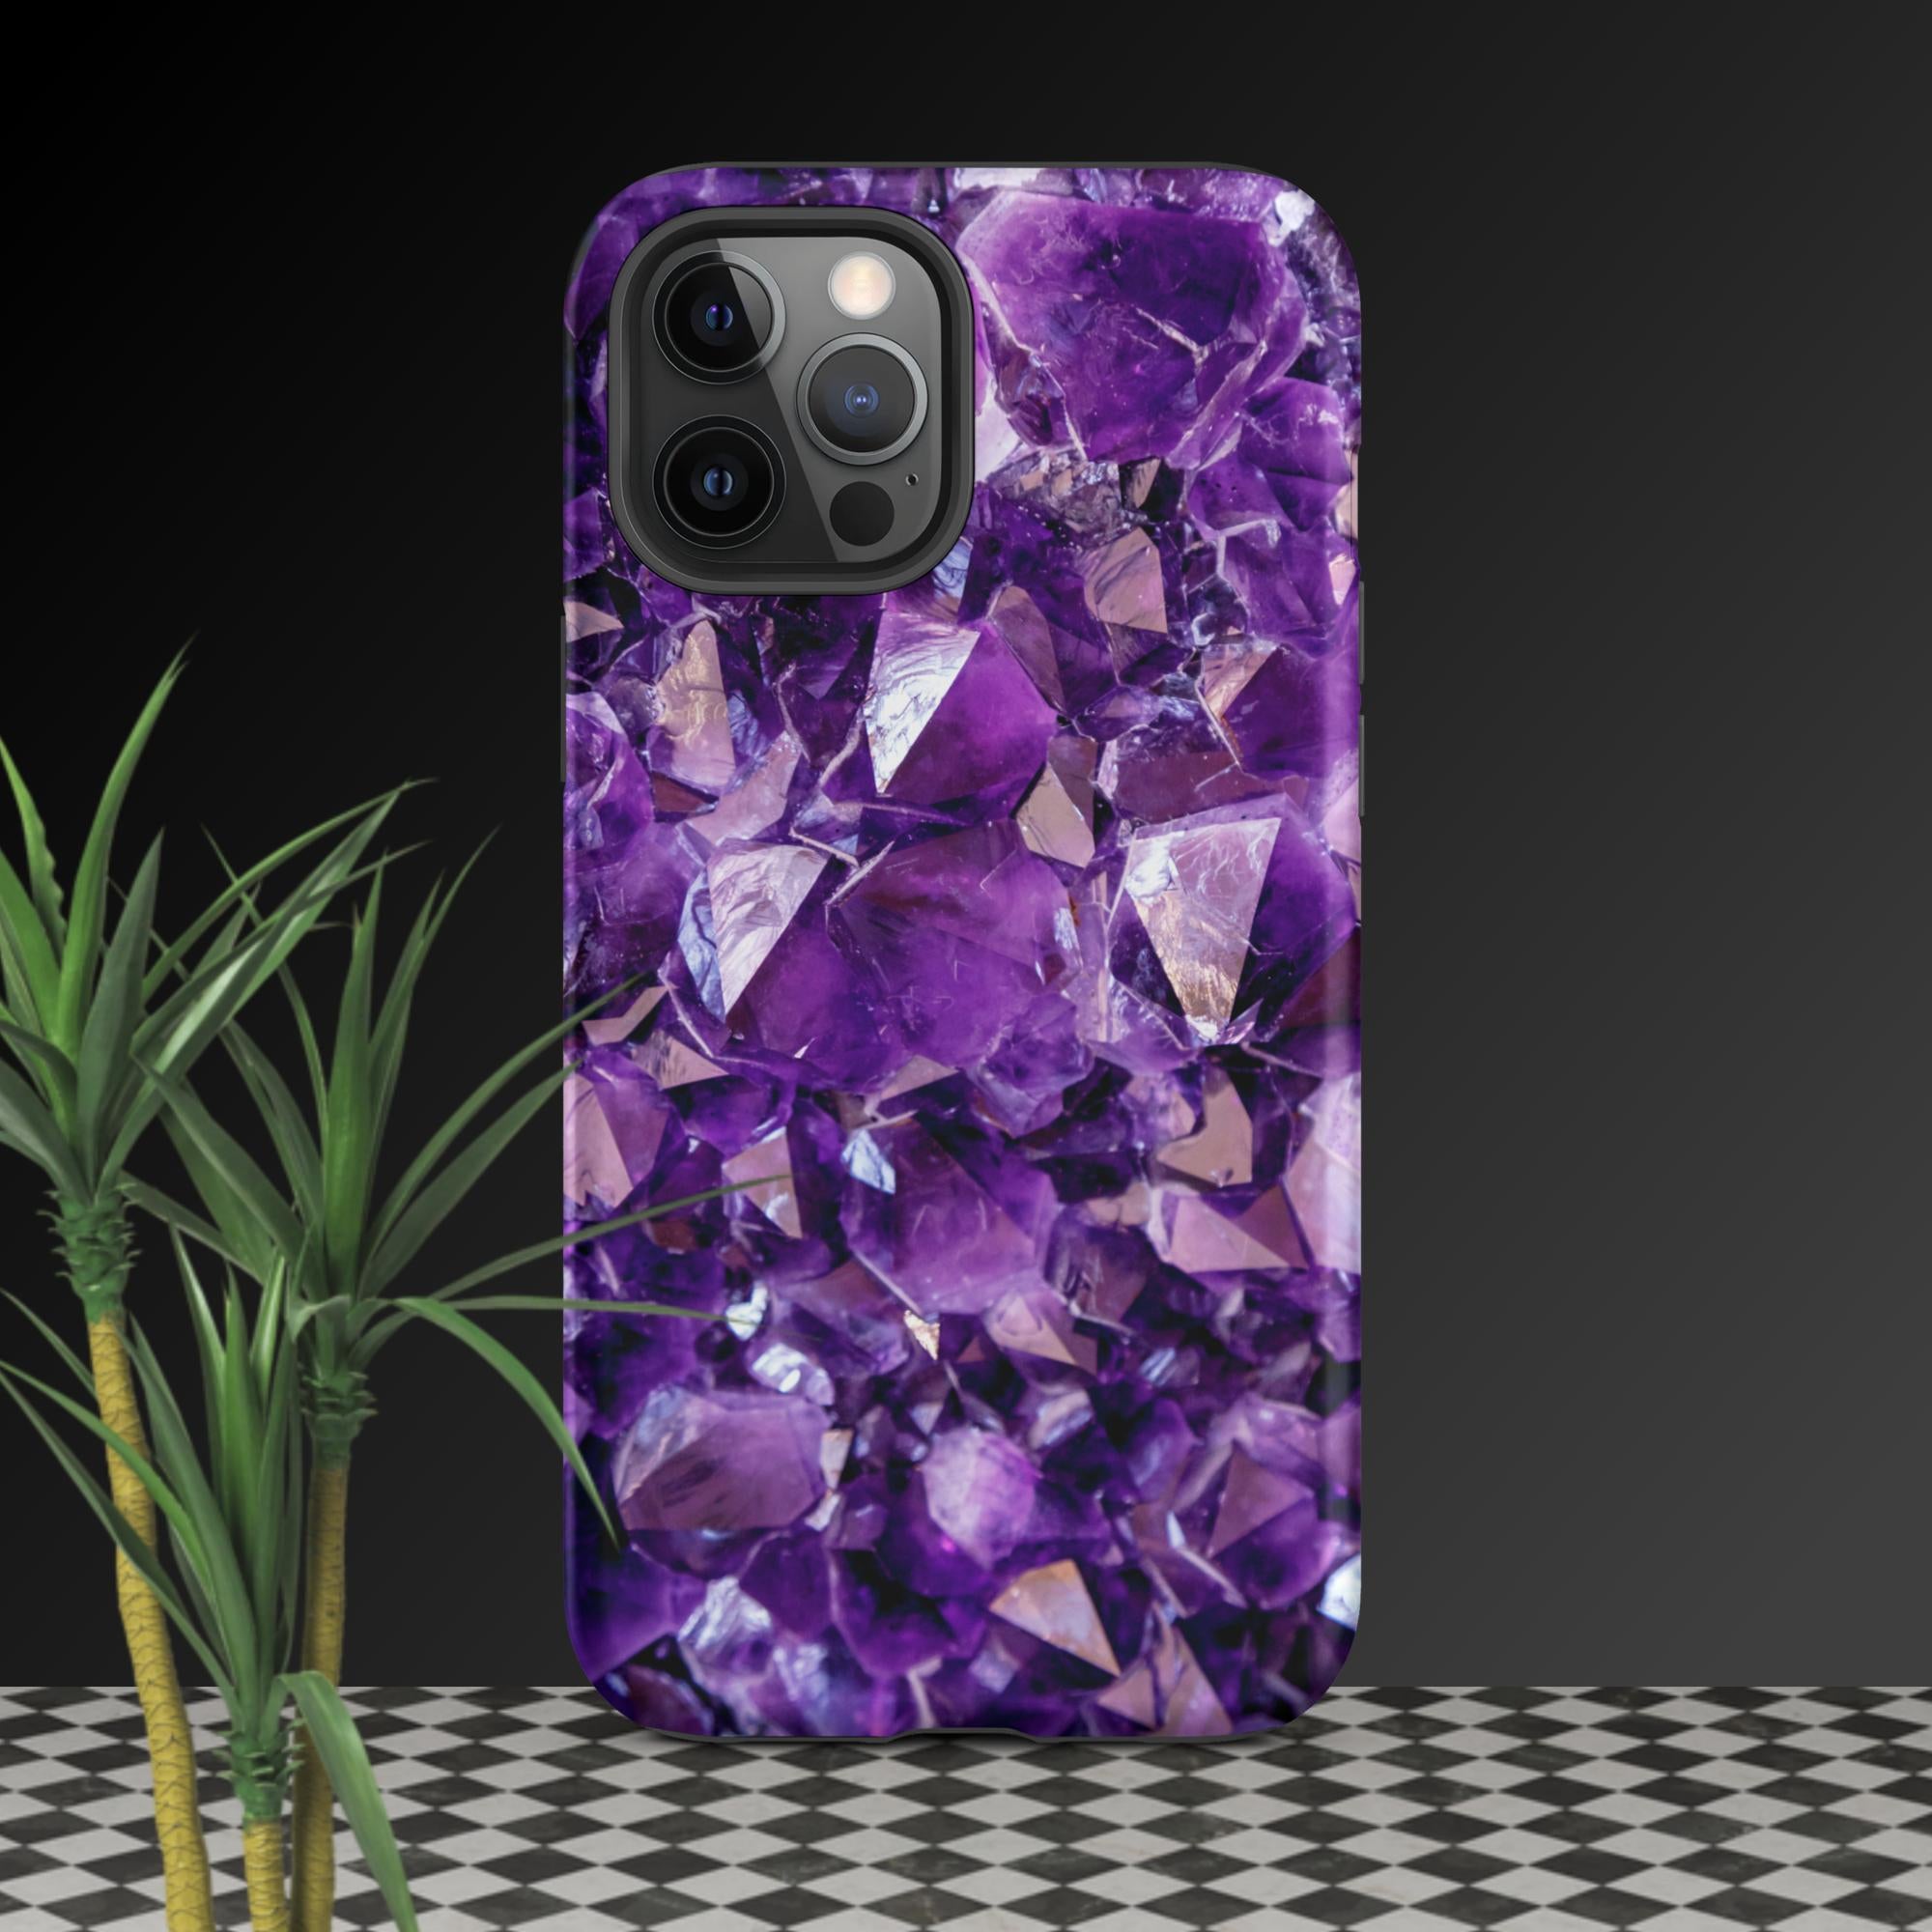 purple amethyst crystal geode phone case by clarity cove iphone 12 pro max